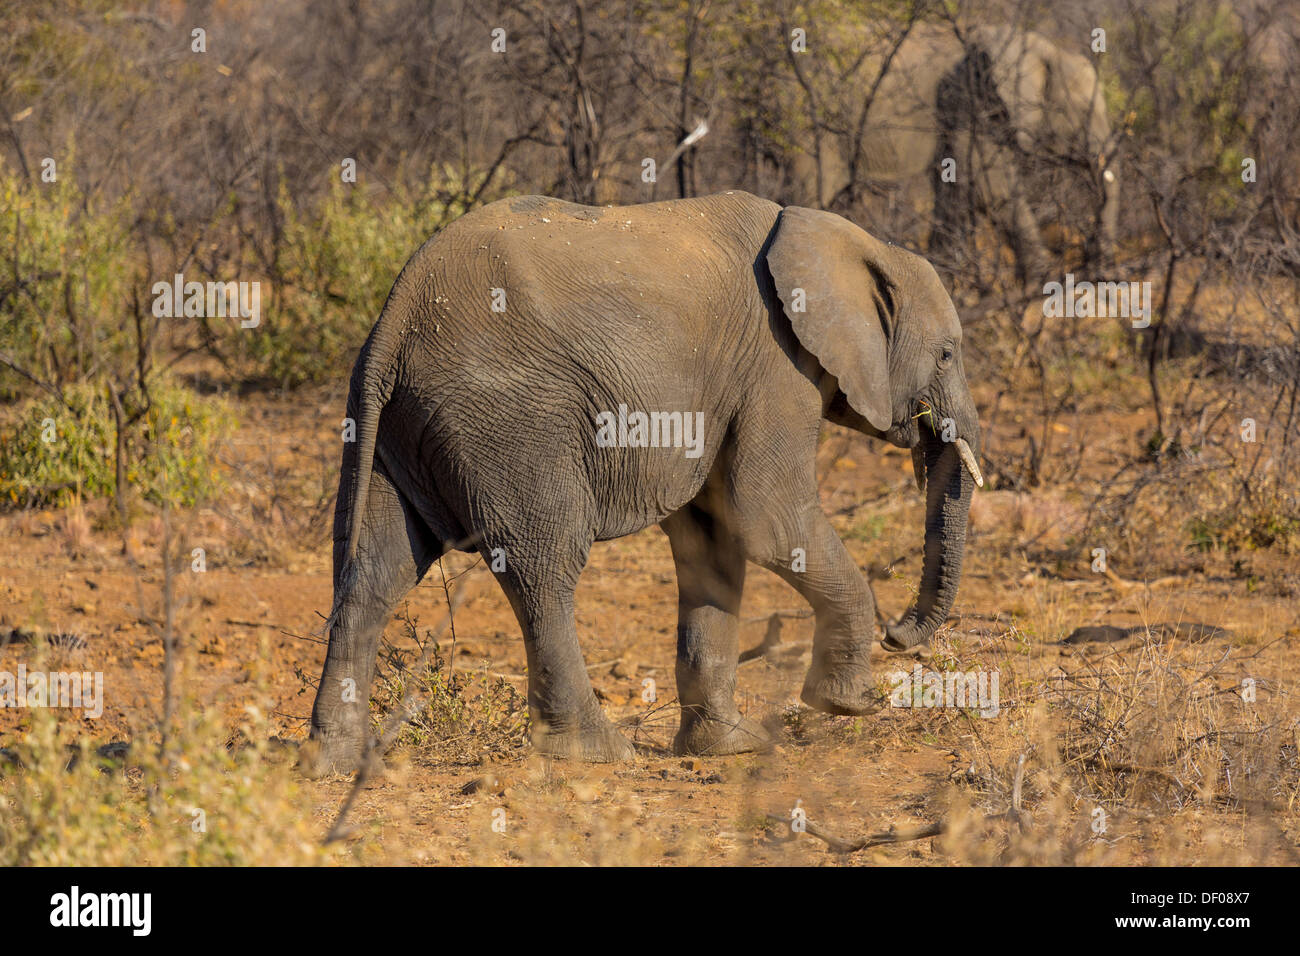 A very yount elephant wandering in the grasslands of South Africa's Pilanesberg National Park Stock Photo